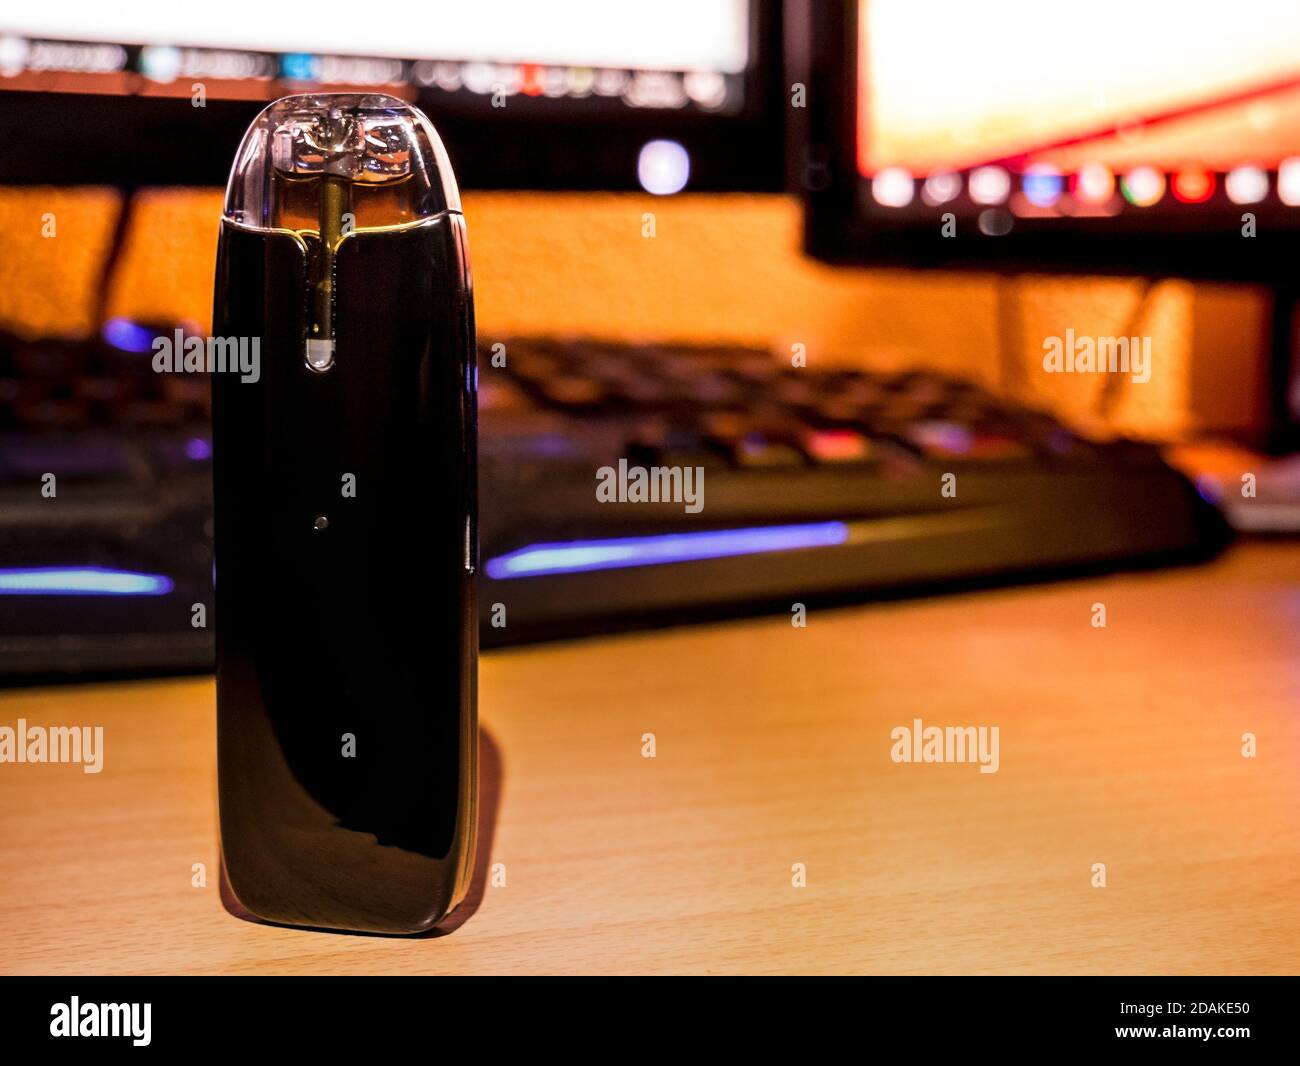 Electronic cigarette - the so-called POD system for vaping, standing on  desk in front of blurry backlit keyboard and PC monitors in background  Stock Photo - Alamy